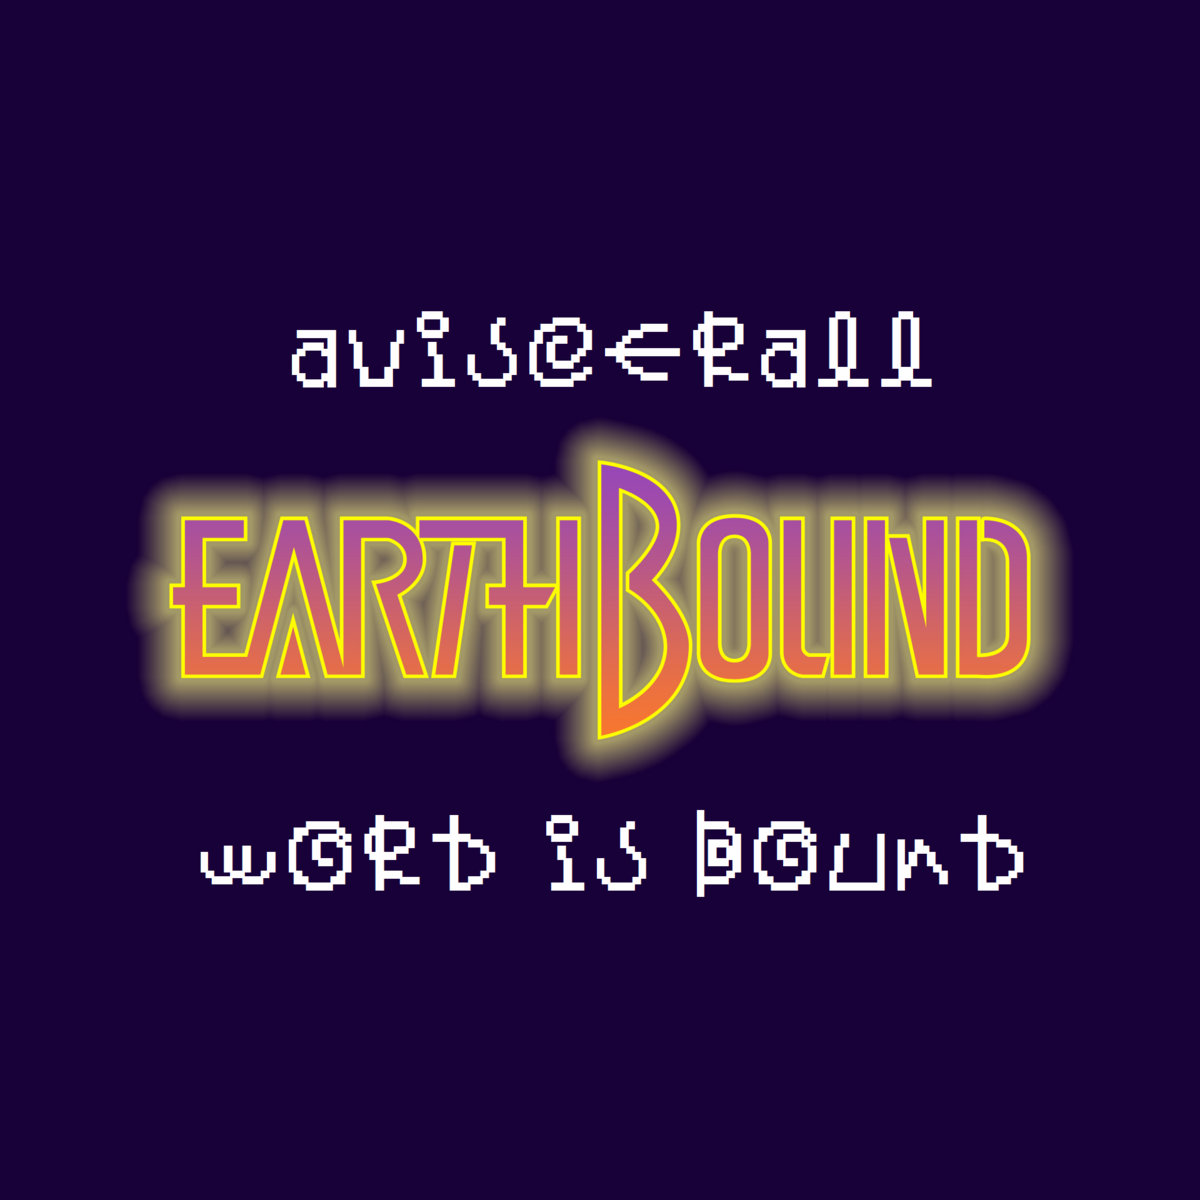 Earthbound music download